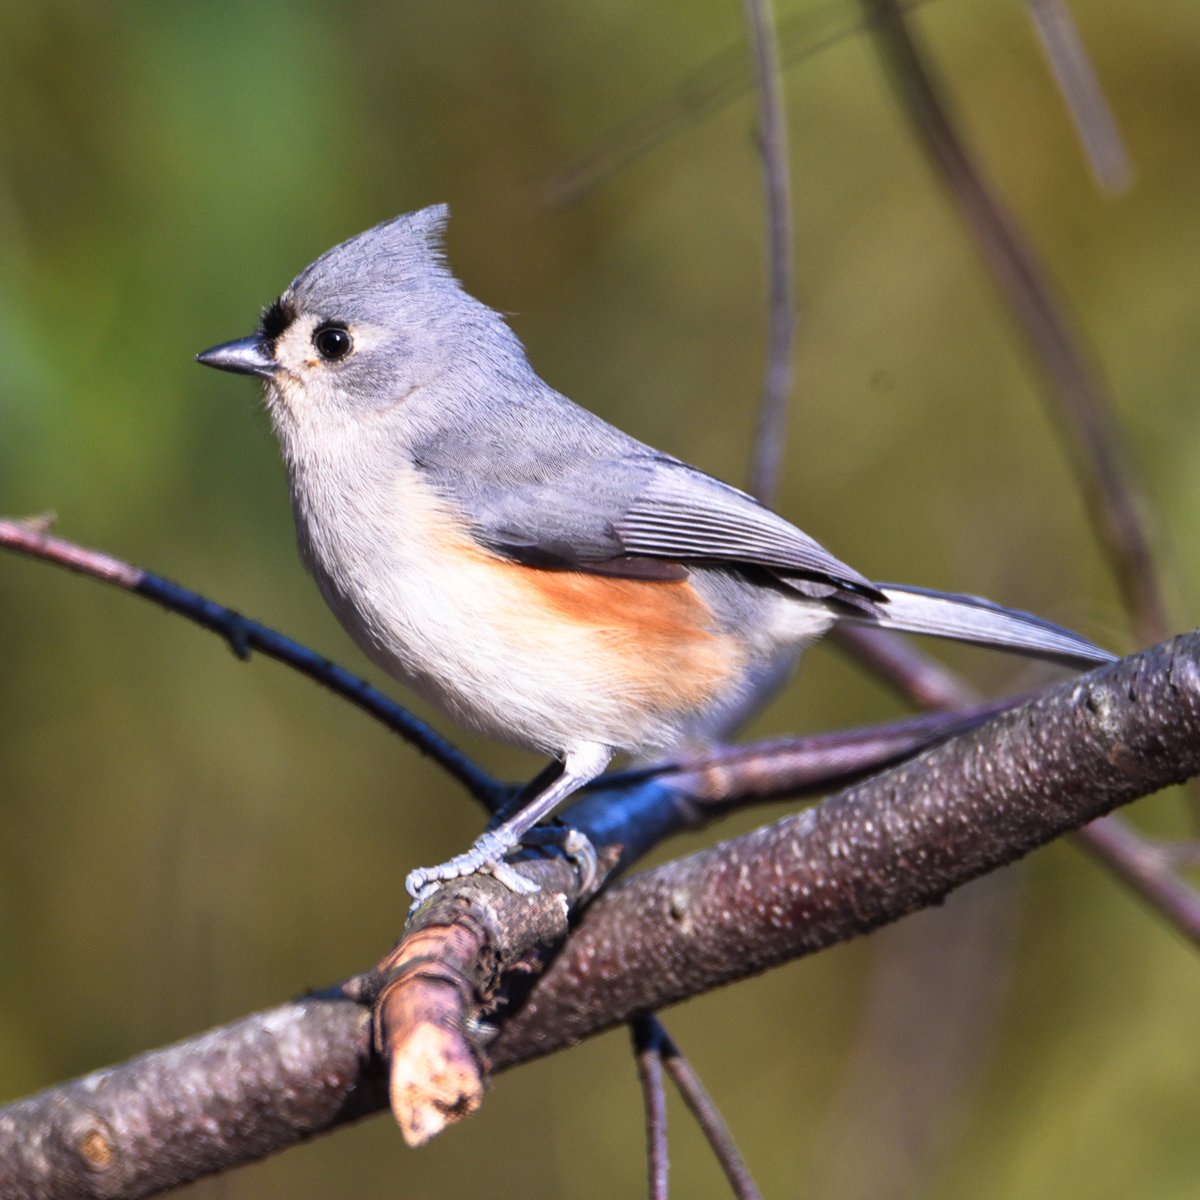 A Tufted-Titmouse who is wondering how in the World he wound up being called a Titmouse and furthermore what is this tufted business all about?

#greensboroboggarden
#tuftedtitmouse
#birdphotography
#birdpics
#birdpicsdaily
#naturephotography
#wildlifephotography
#tuftedtitmouse